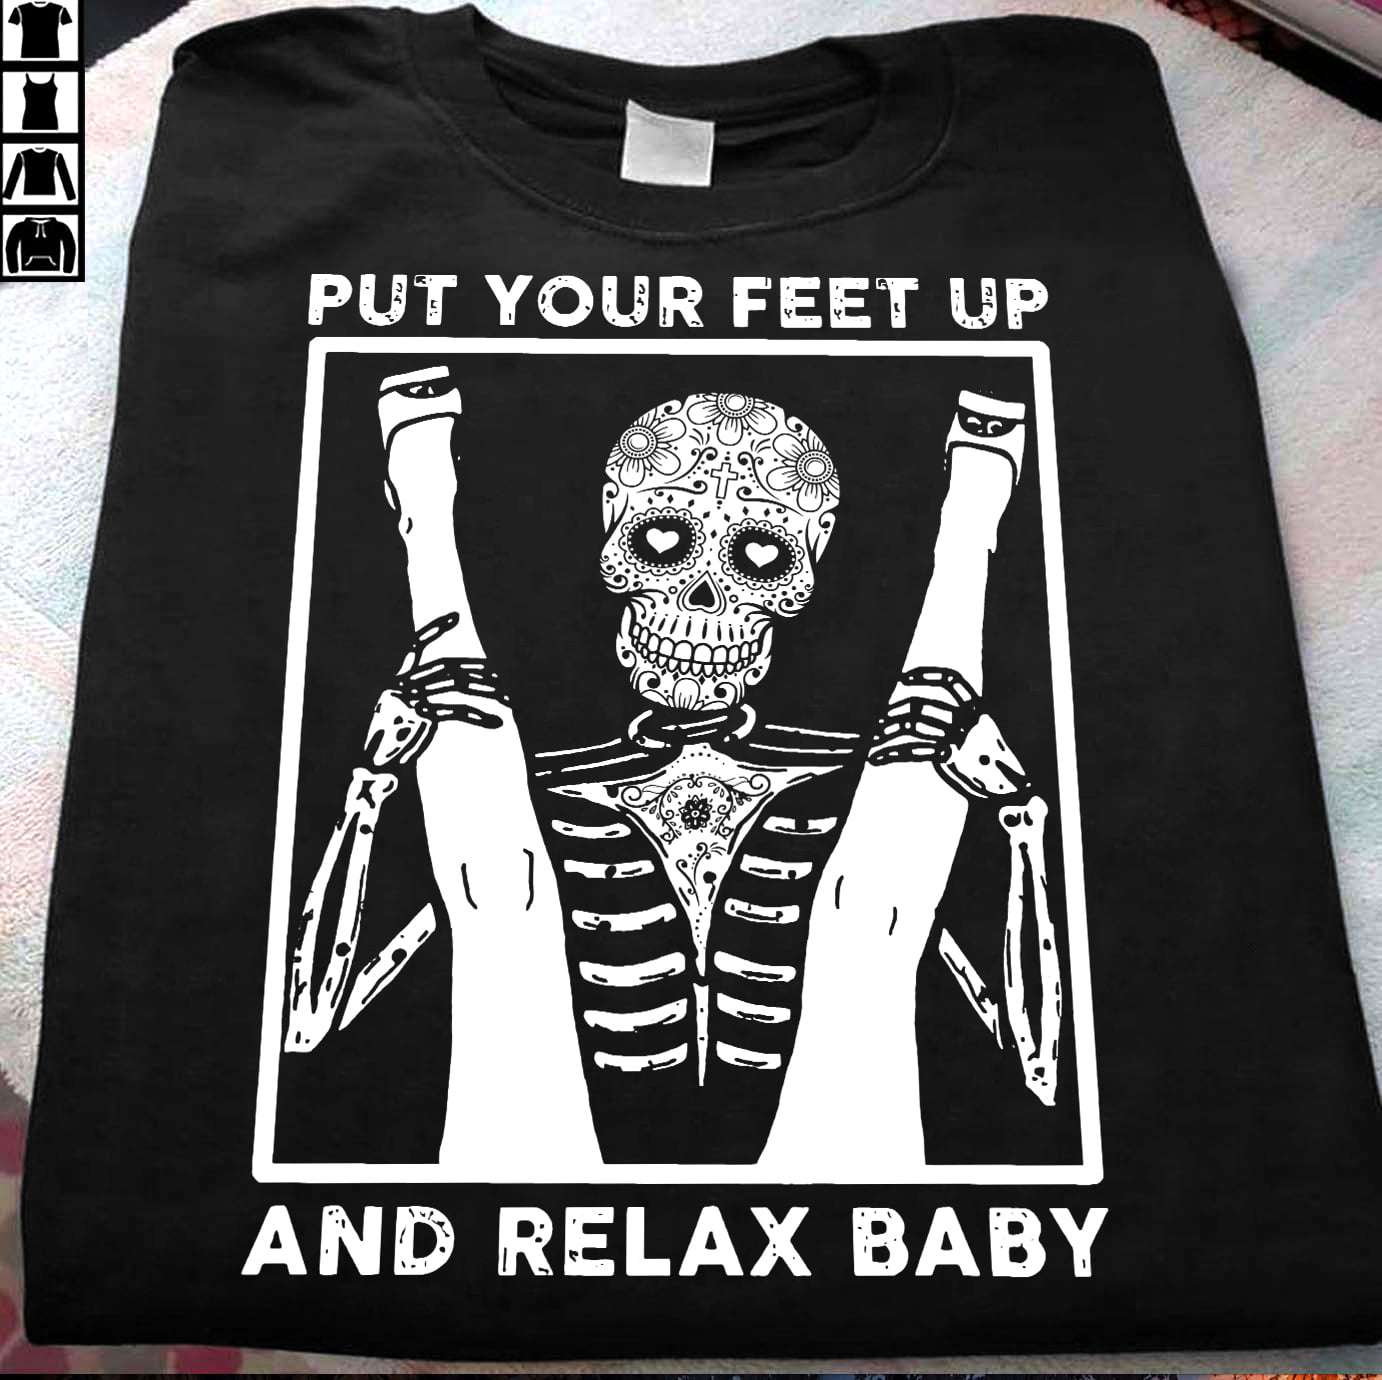 Put your feet up and relax baby - Evil skull, woman legs